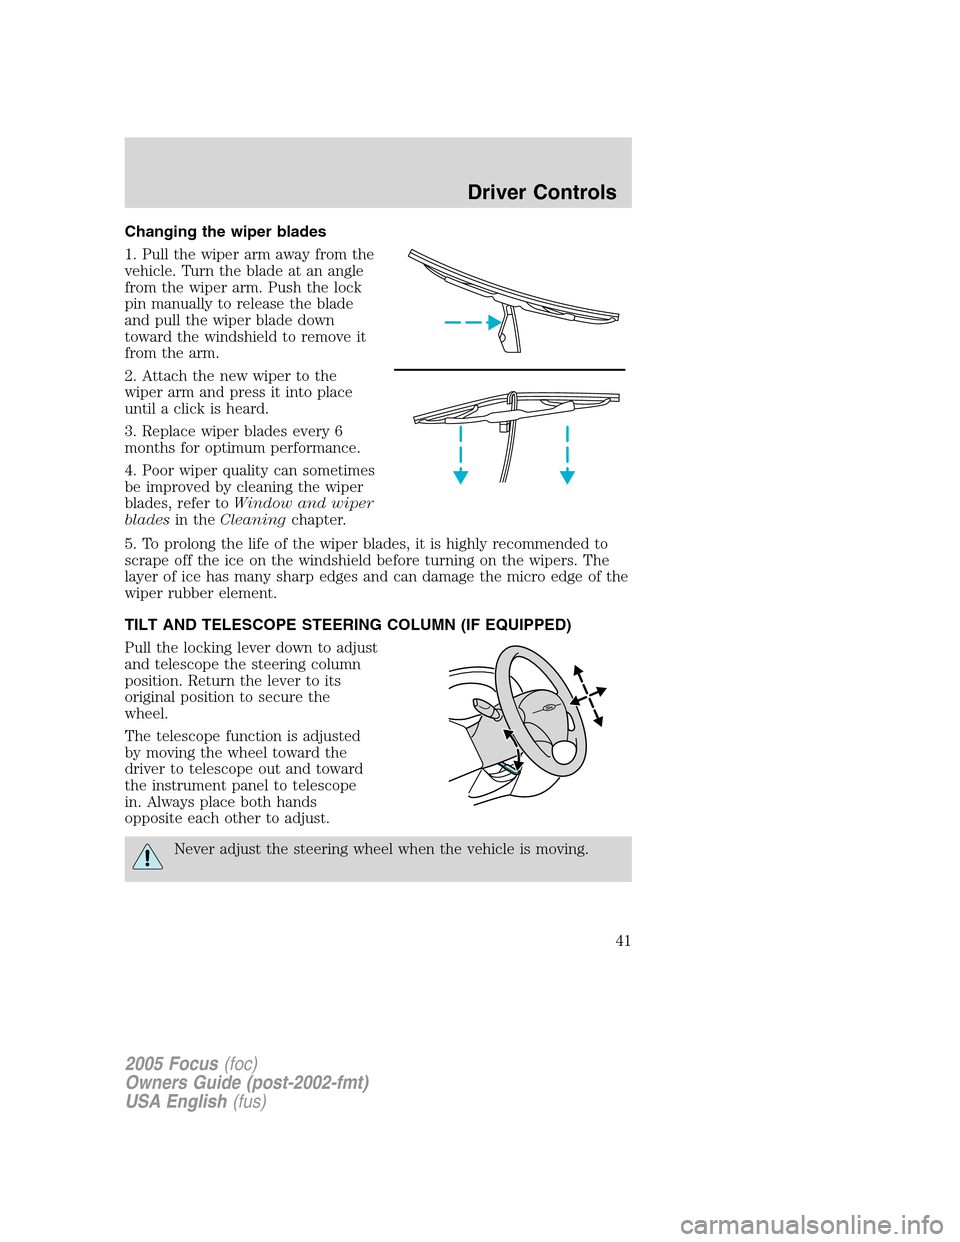 FORD FOCUS 2005 1.G Service Manual Changing the wiper blades
1. Pull the wiper arm away from the
vehicle. Turn the blade at an angle
from the wiper arm. Push the lock
pin manually to release the blade
and pull the wiper blade down
towa